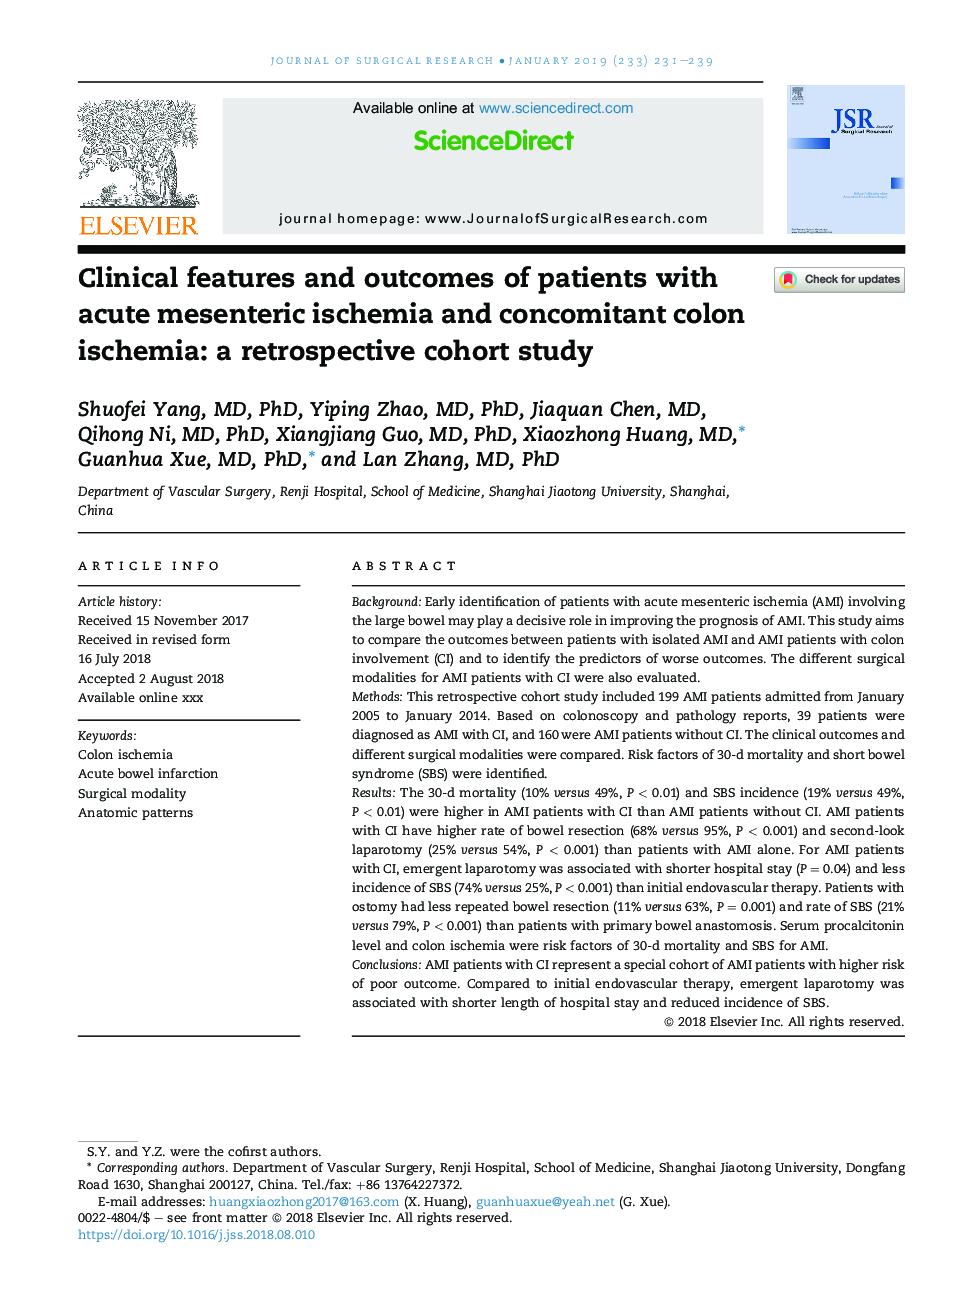 Clinical features and outcomes of patients with acute mesenteric ischemia and concomitant colon ischemia: a retrospective cohort study